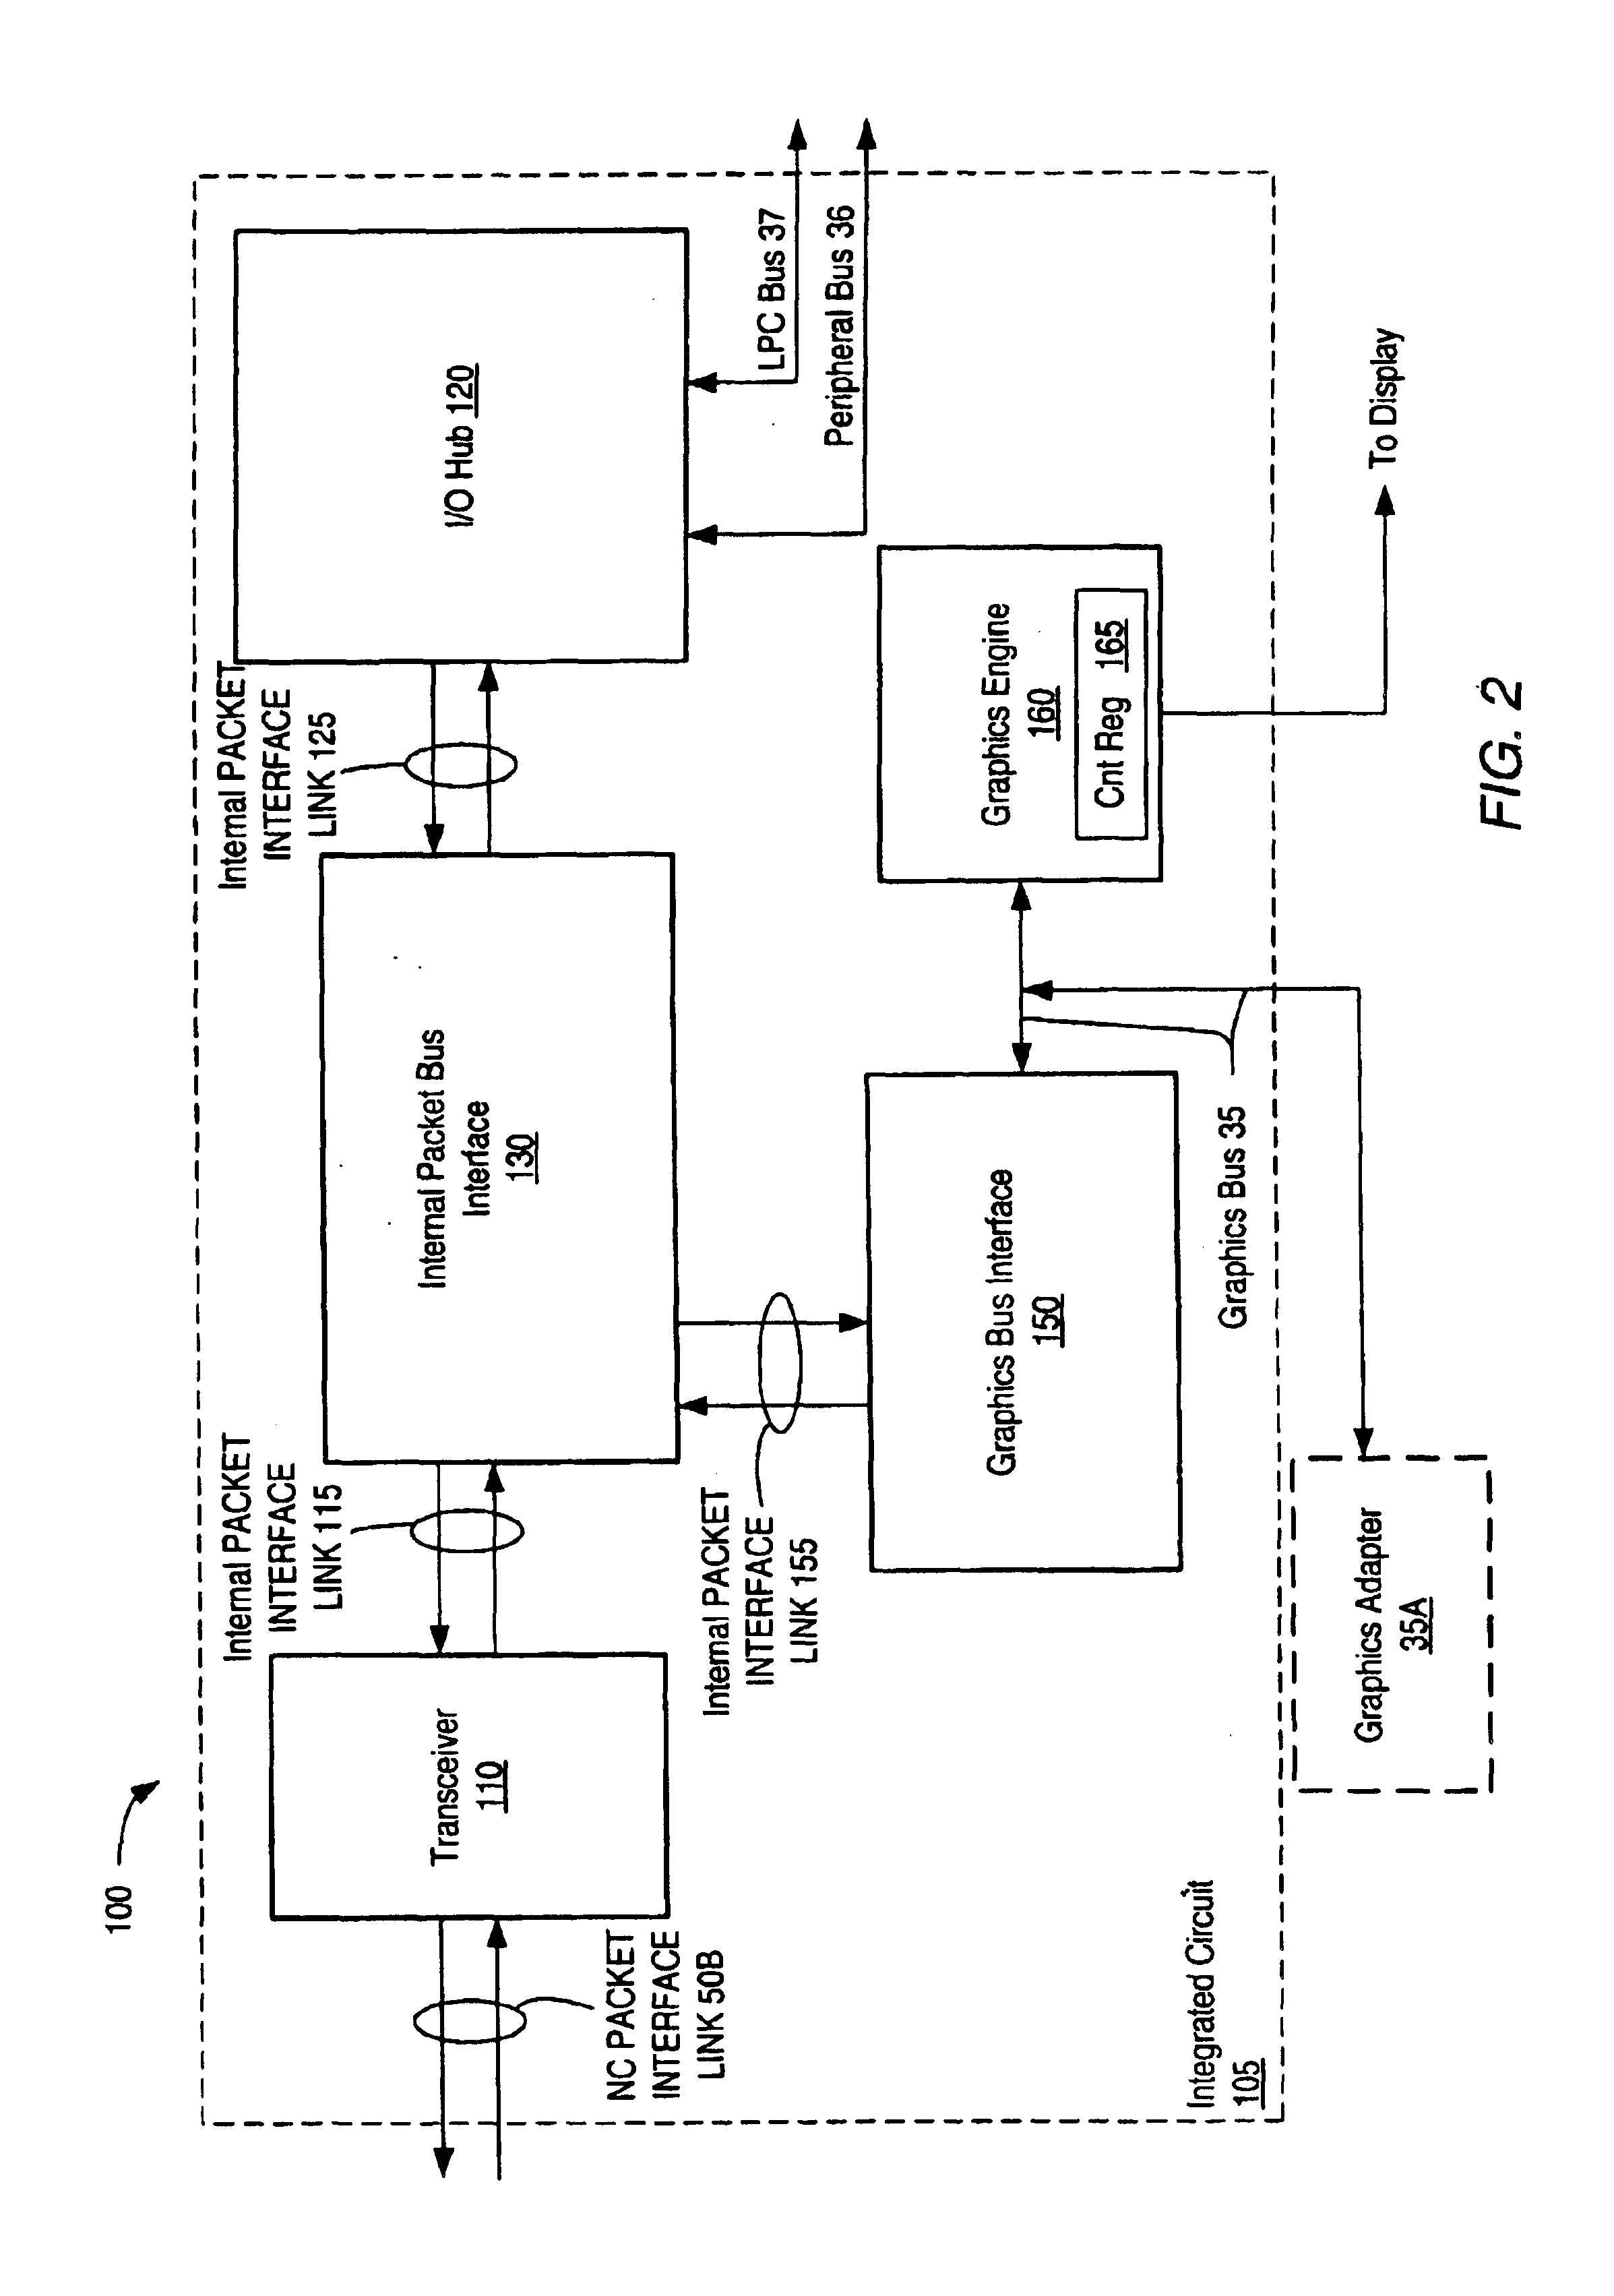 I/O node for a computer system including an integrated graphics engine and an integrated I/O hub